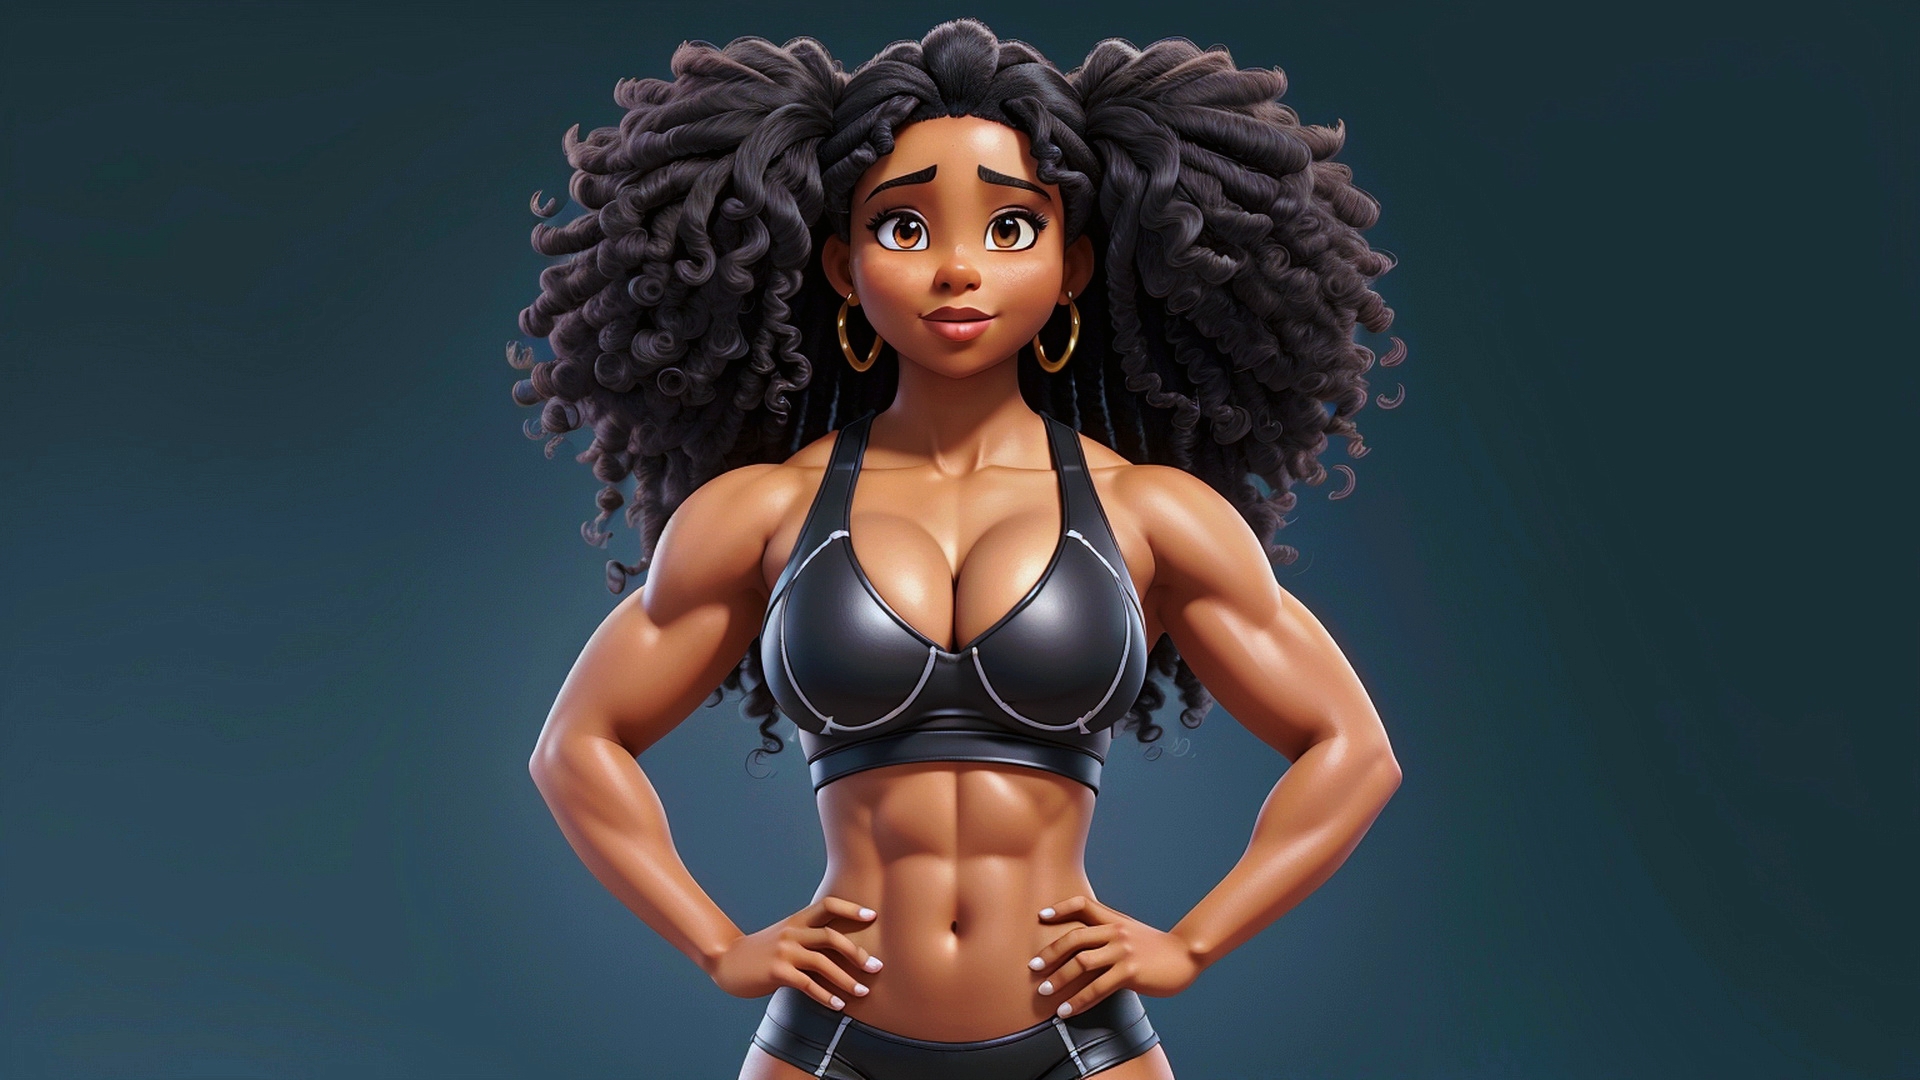 Free photo Black girl bodybuilder with bouffant hairstyle on green background